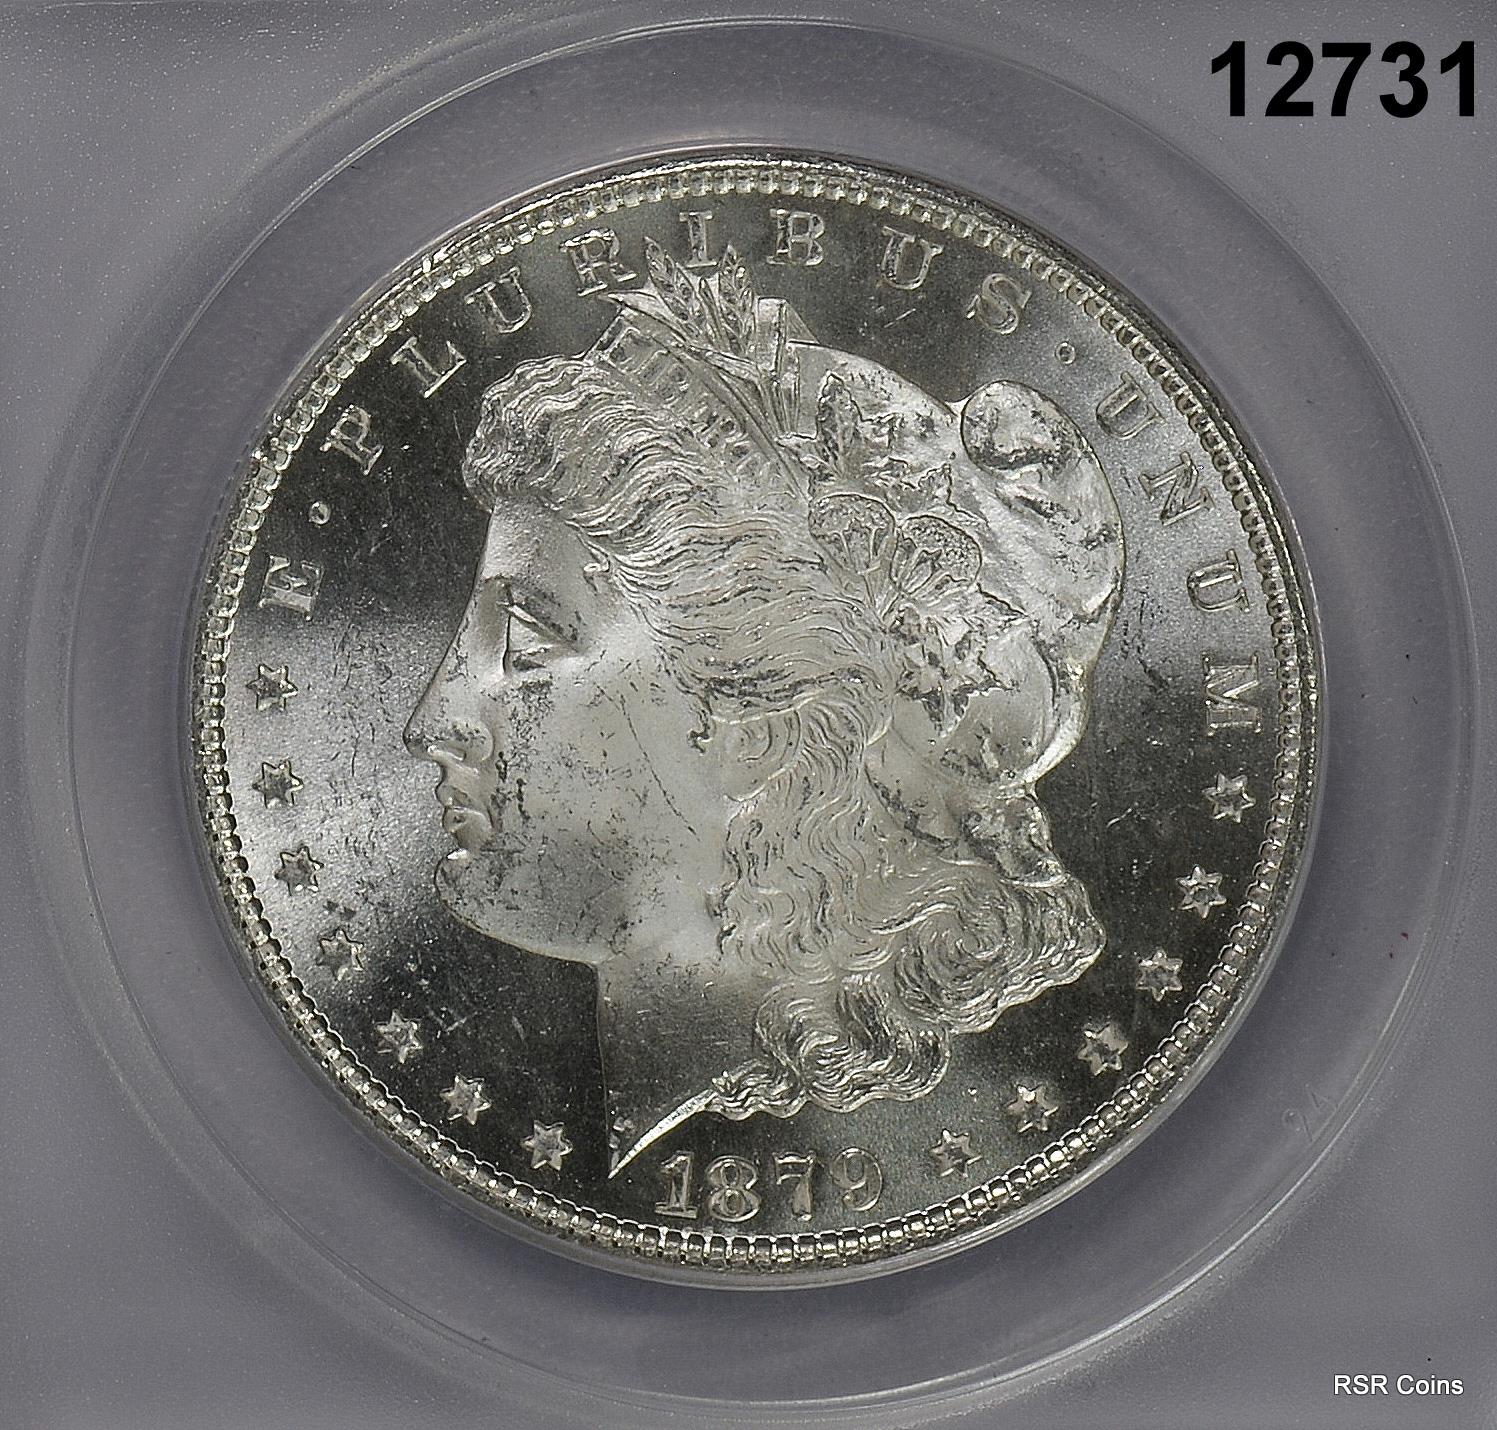 1879 S MORGAN SILVER DOLLAR ANACS CERTIFIED MS64 LOOKS MUCH BETTER GEM! #12731